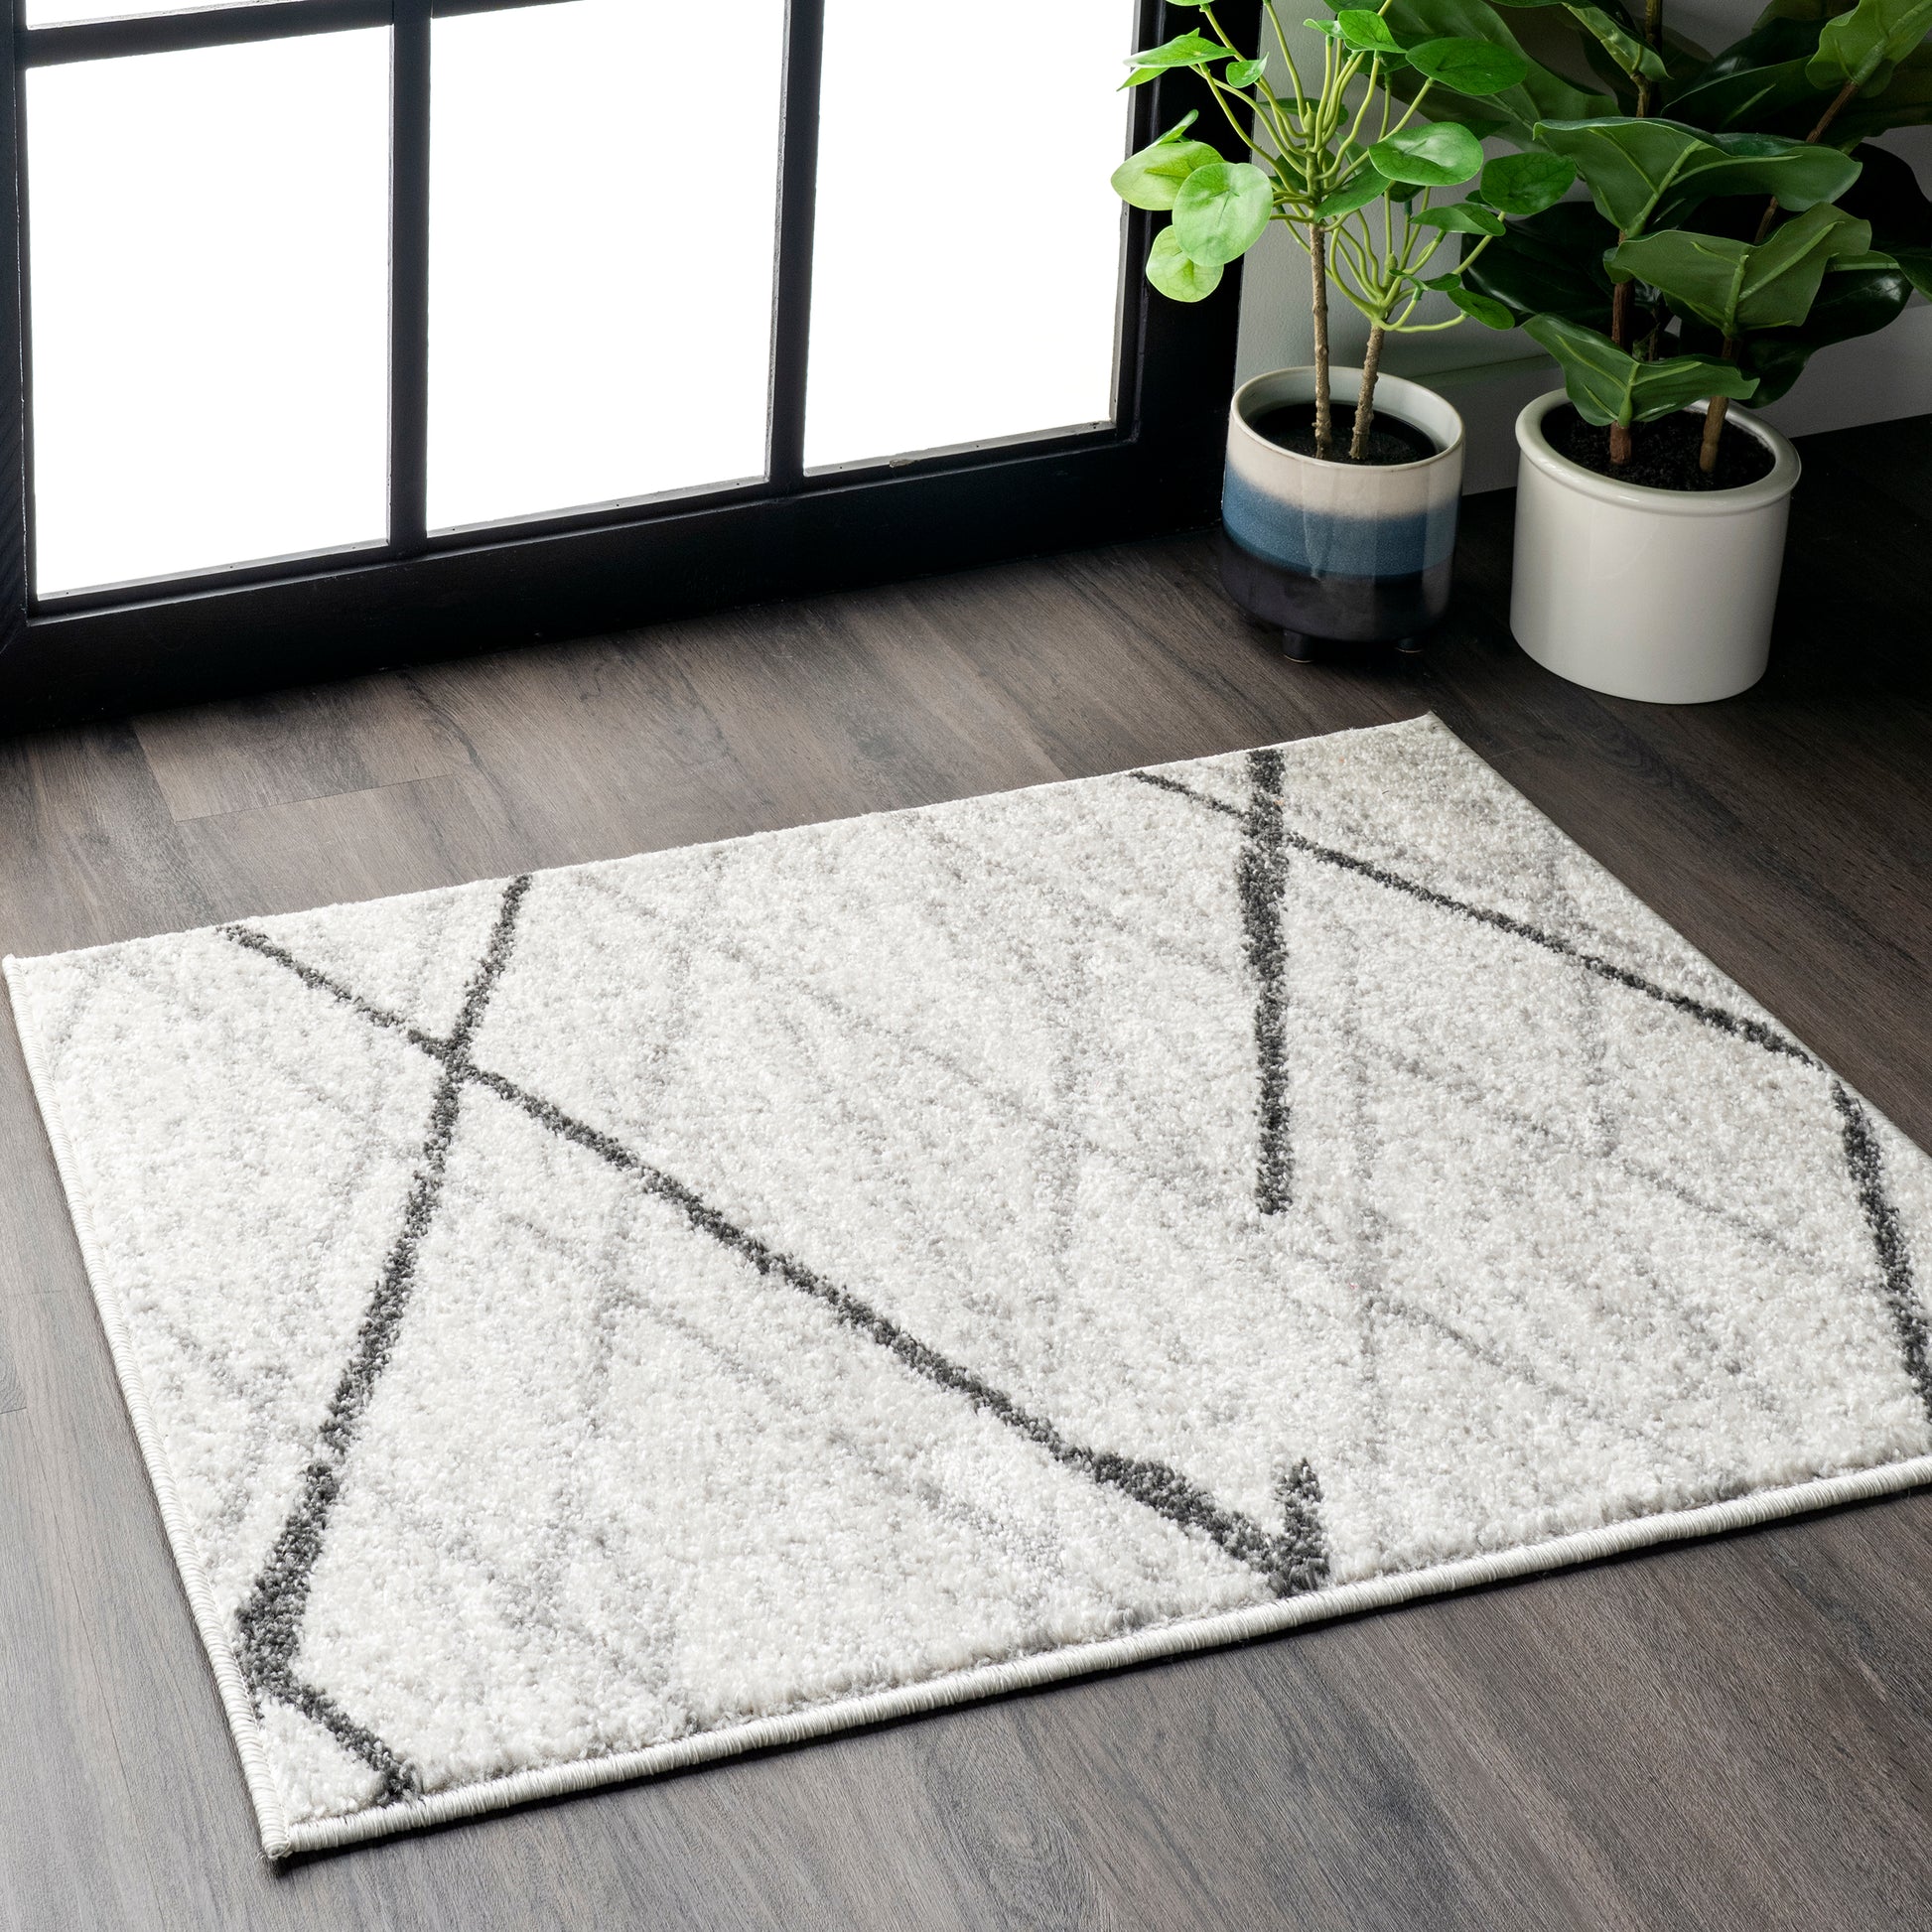 Nuloom Thigpen Contemporary Nth1498D Gray Area Rug